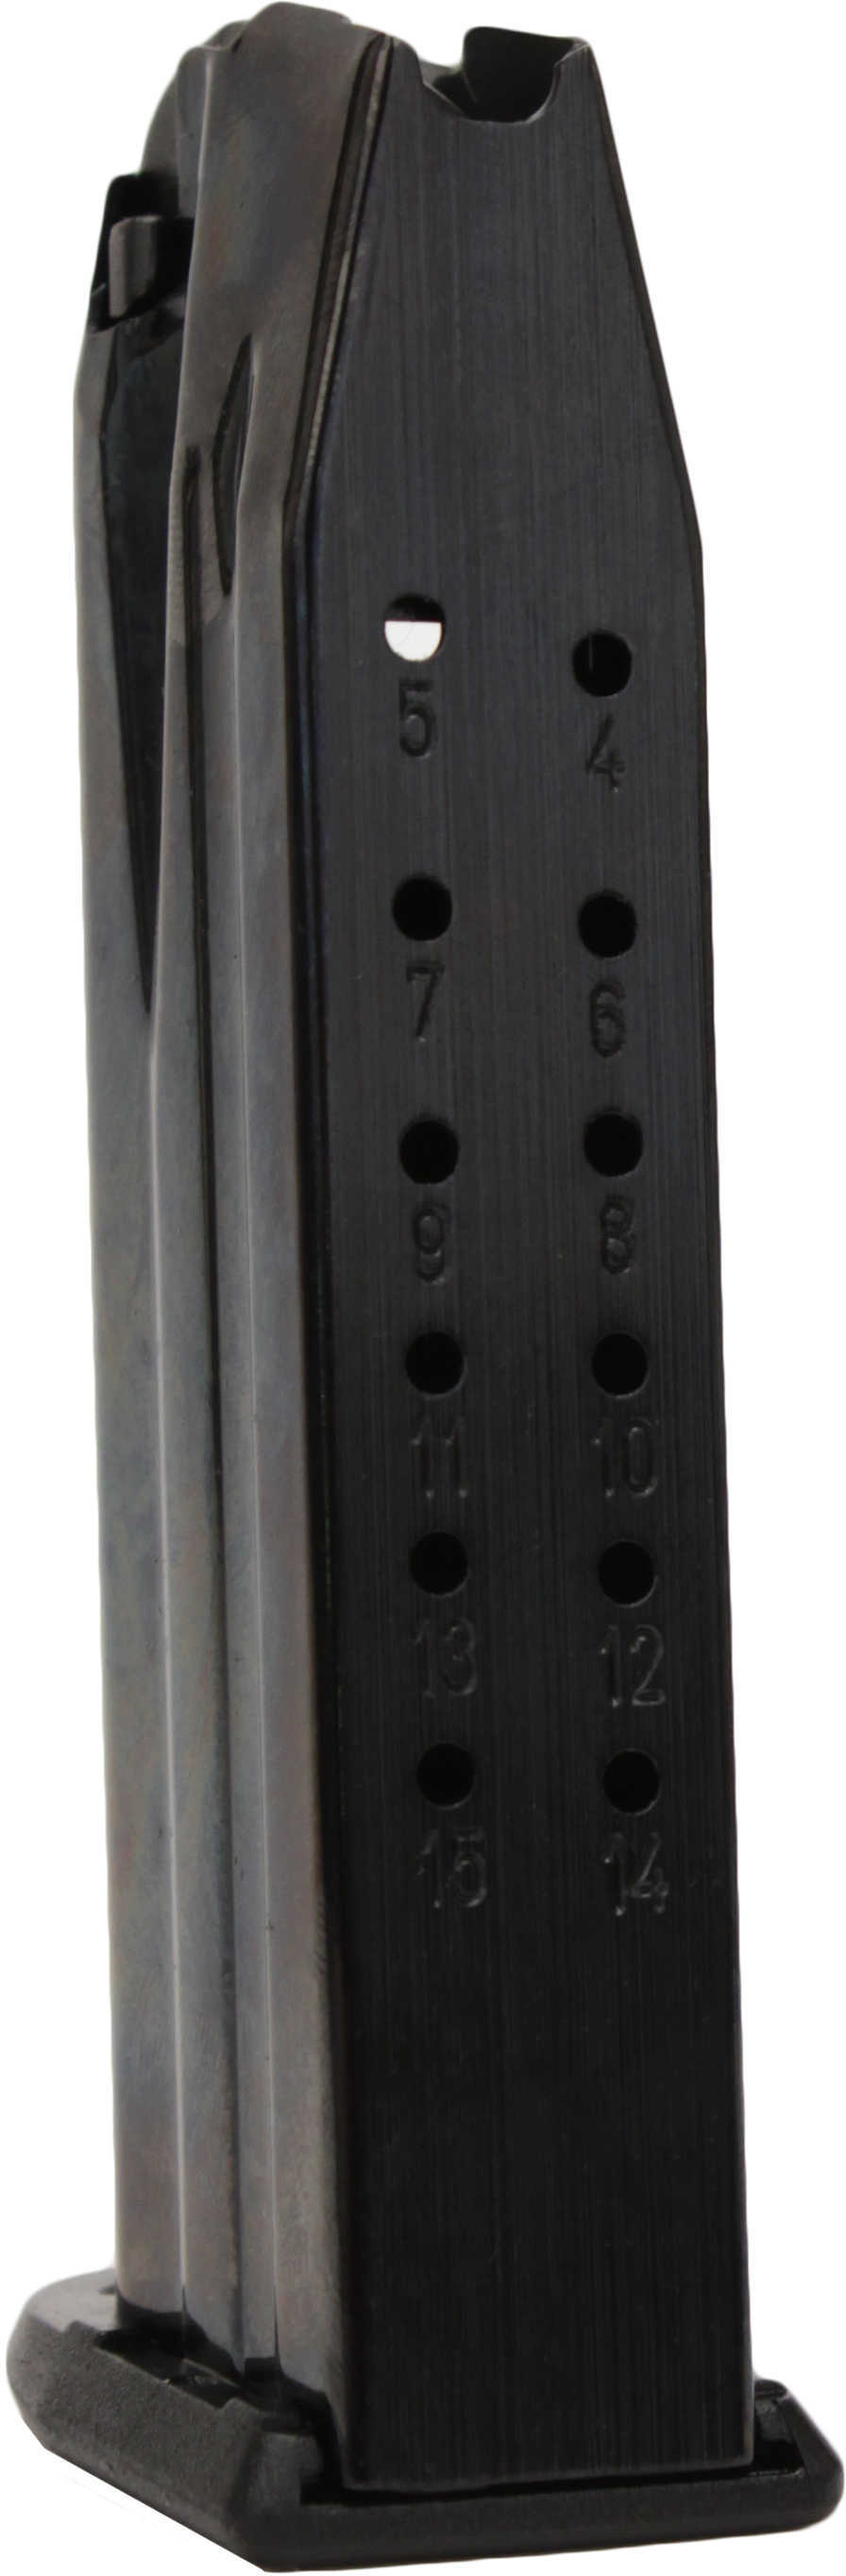 Walther P99 9mm 15-Rd Magazine